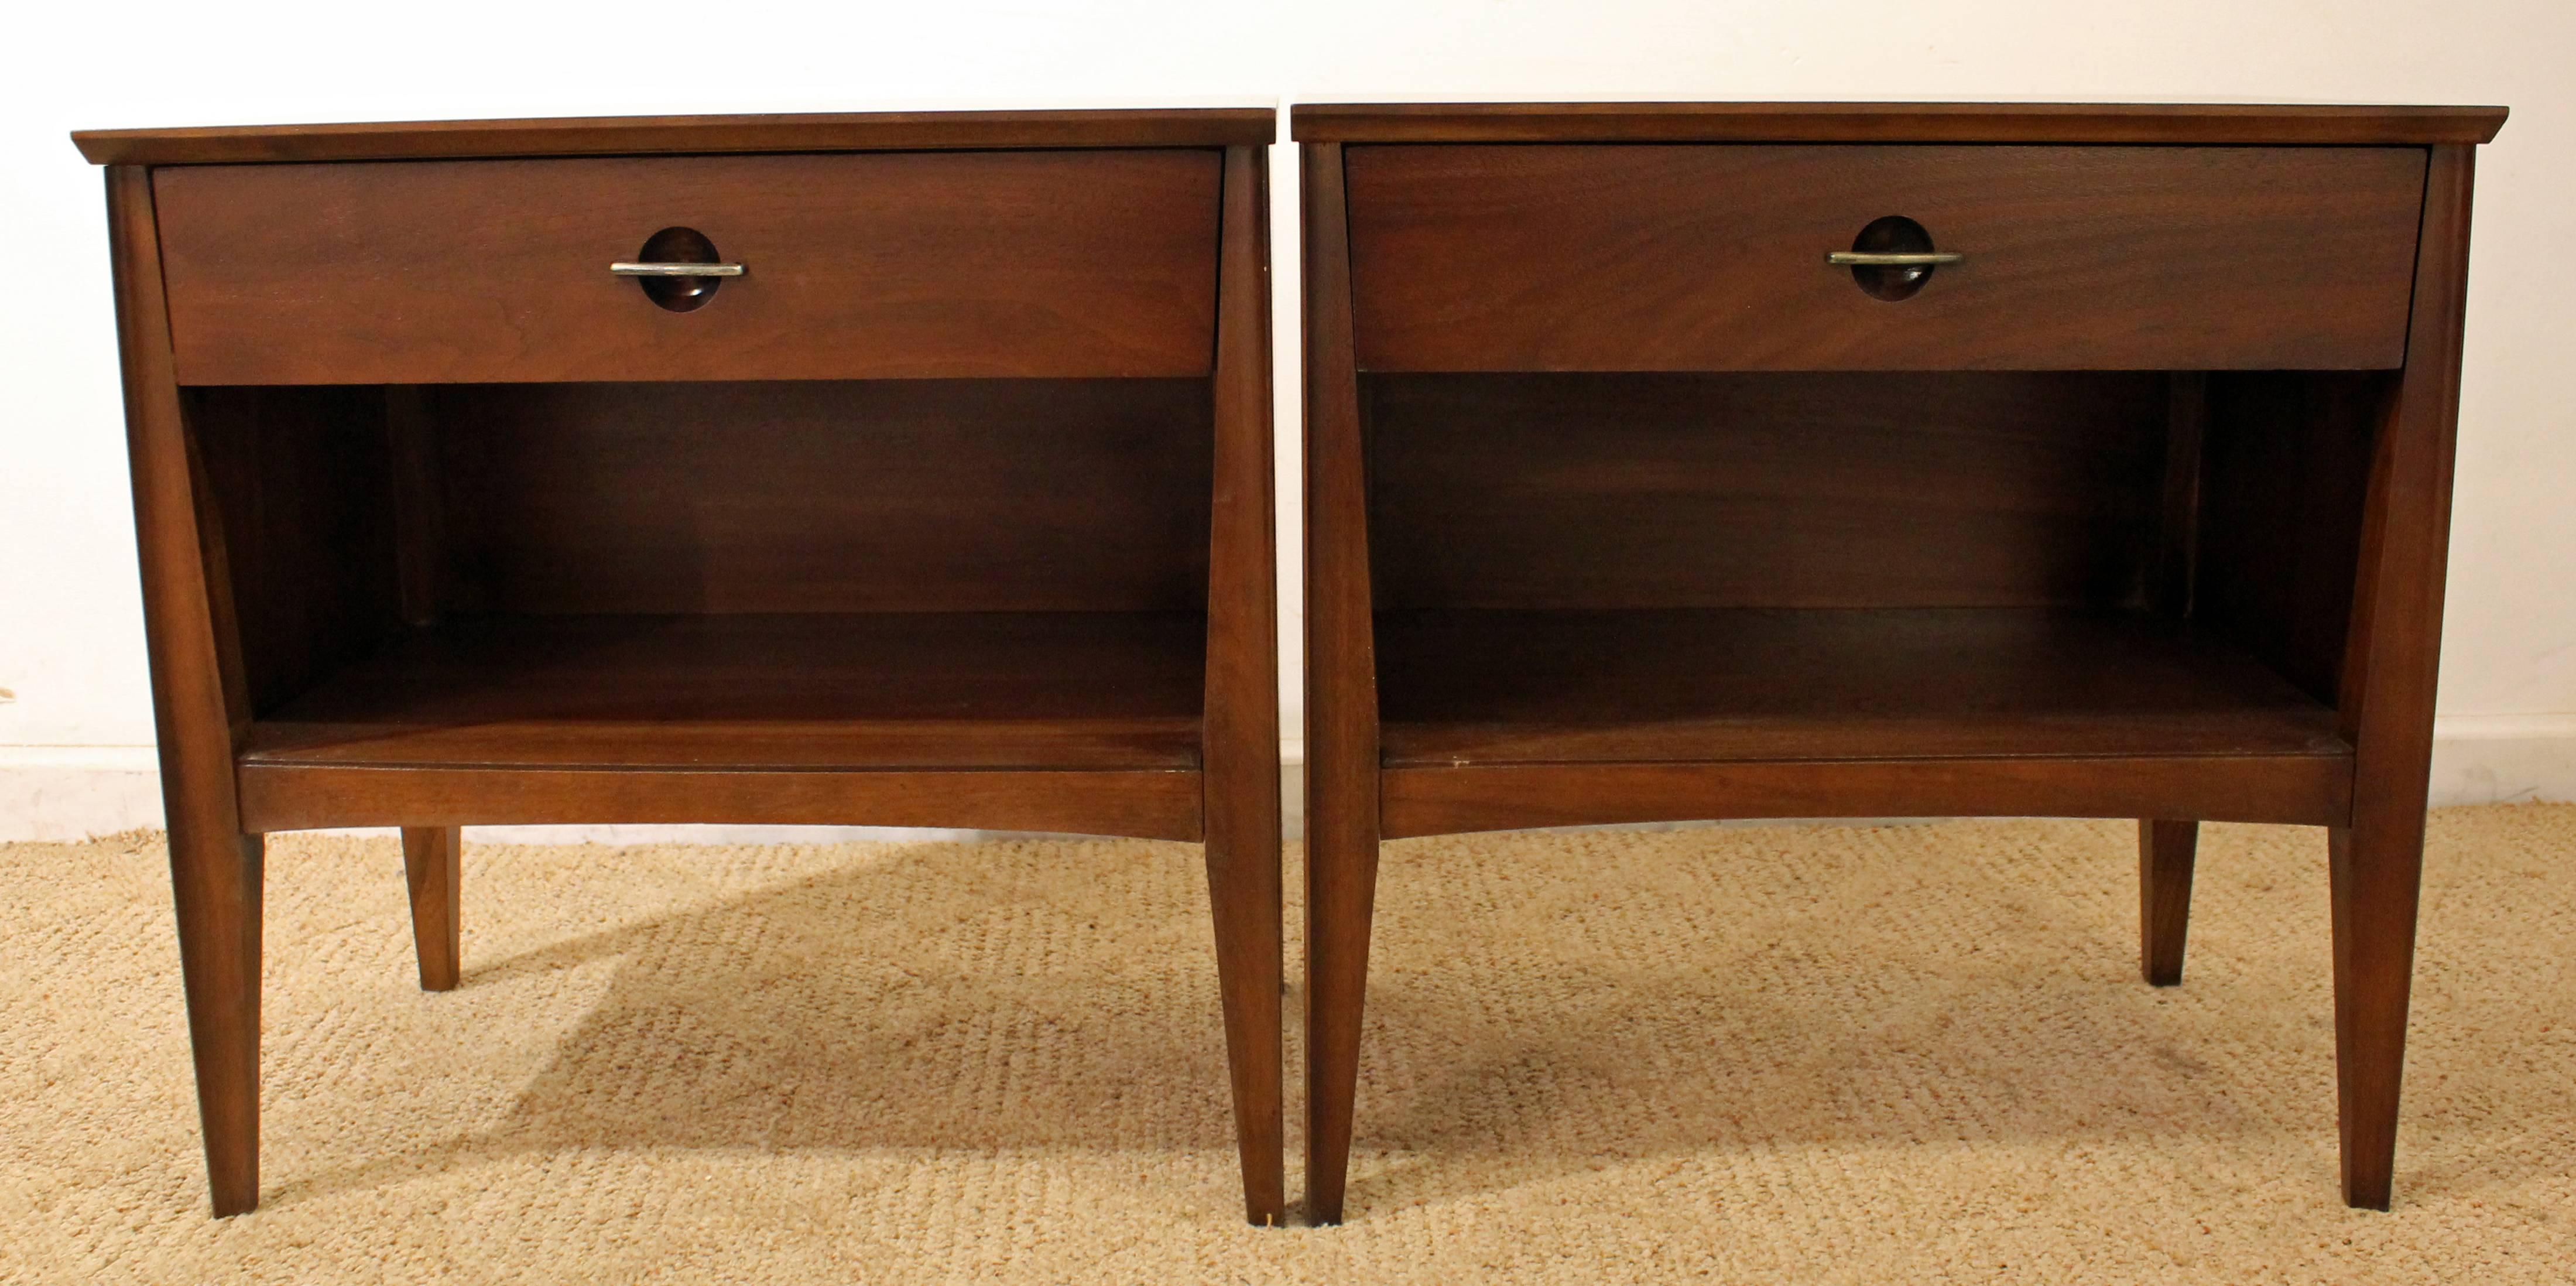 These nightstands have been refinished with a walnut stain and feature one dovetailed drawer each with metal pulls.